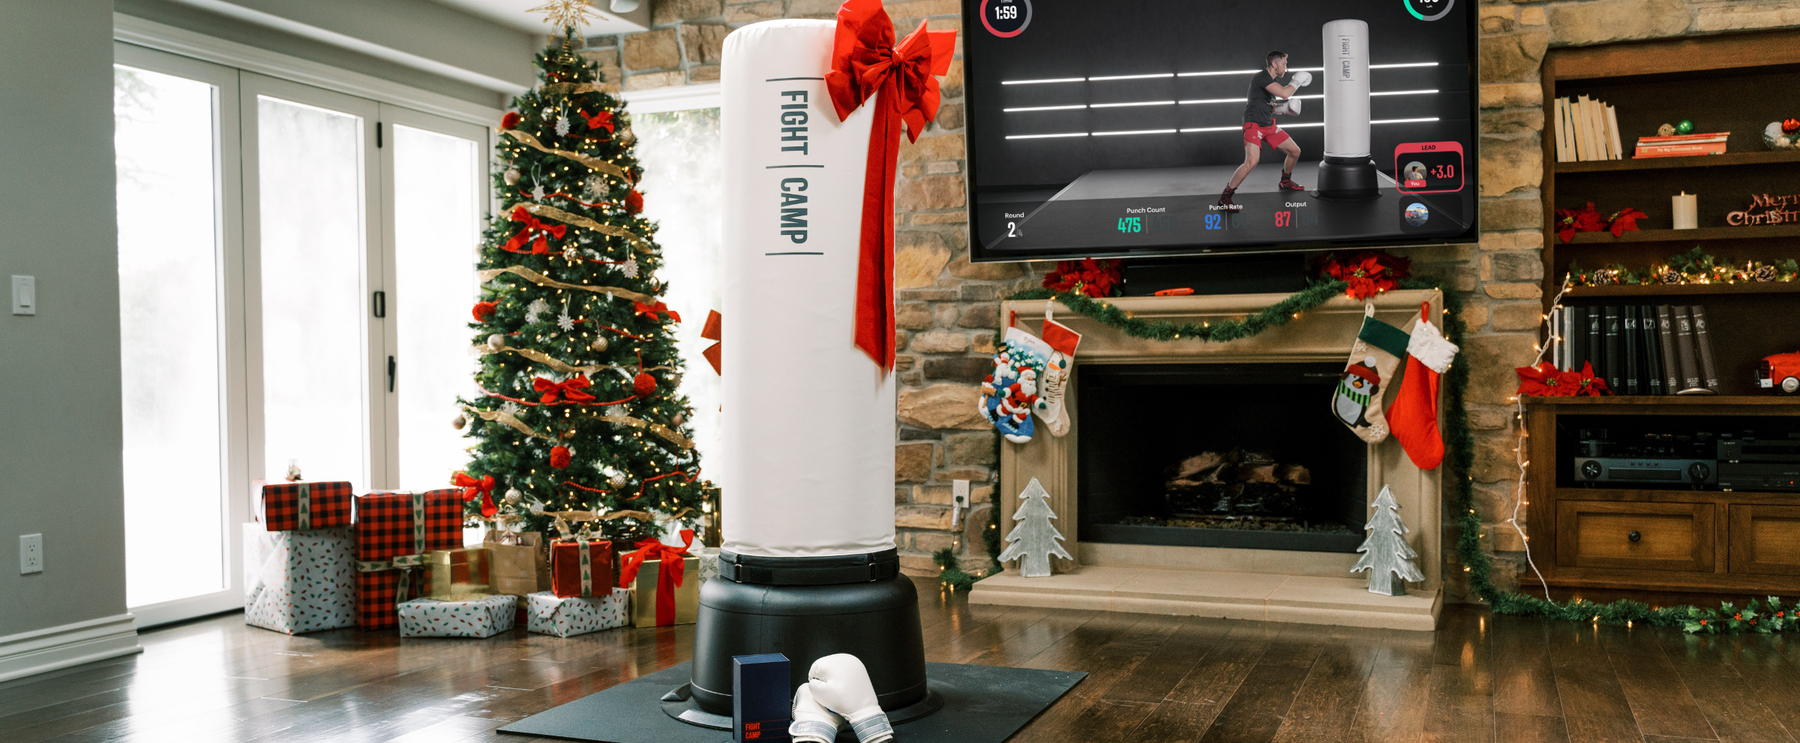 FightCamp Ultimate Boxing Gift Guide